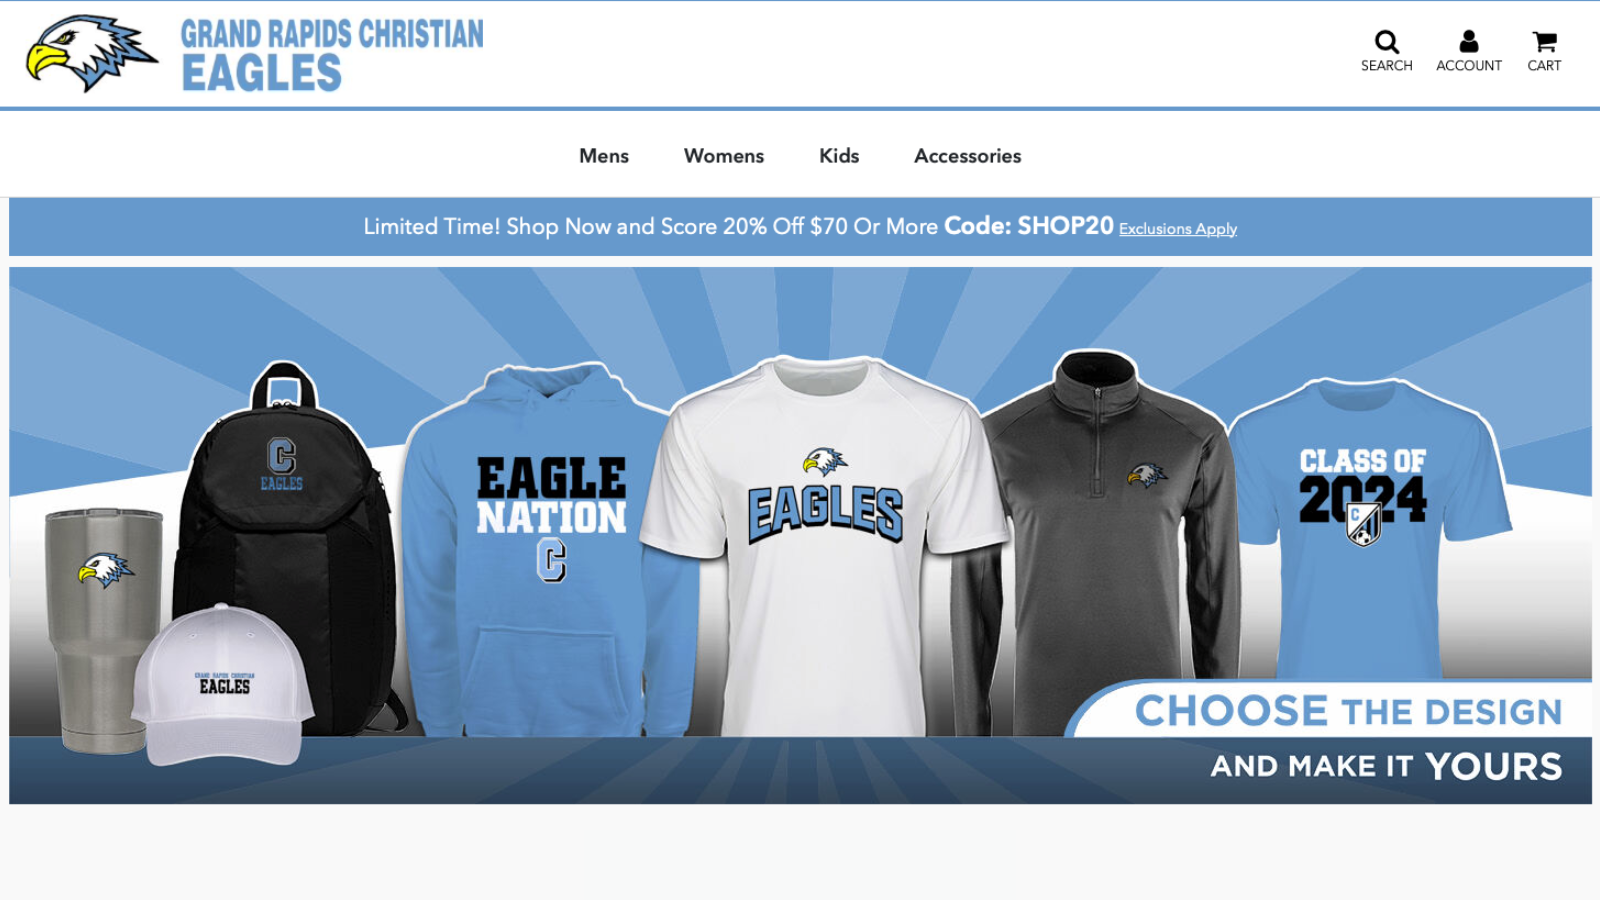 Get your Eagle gear today!